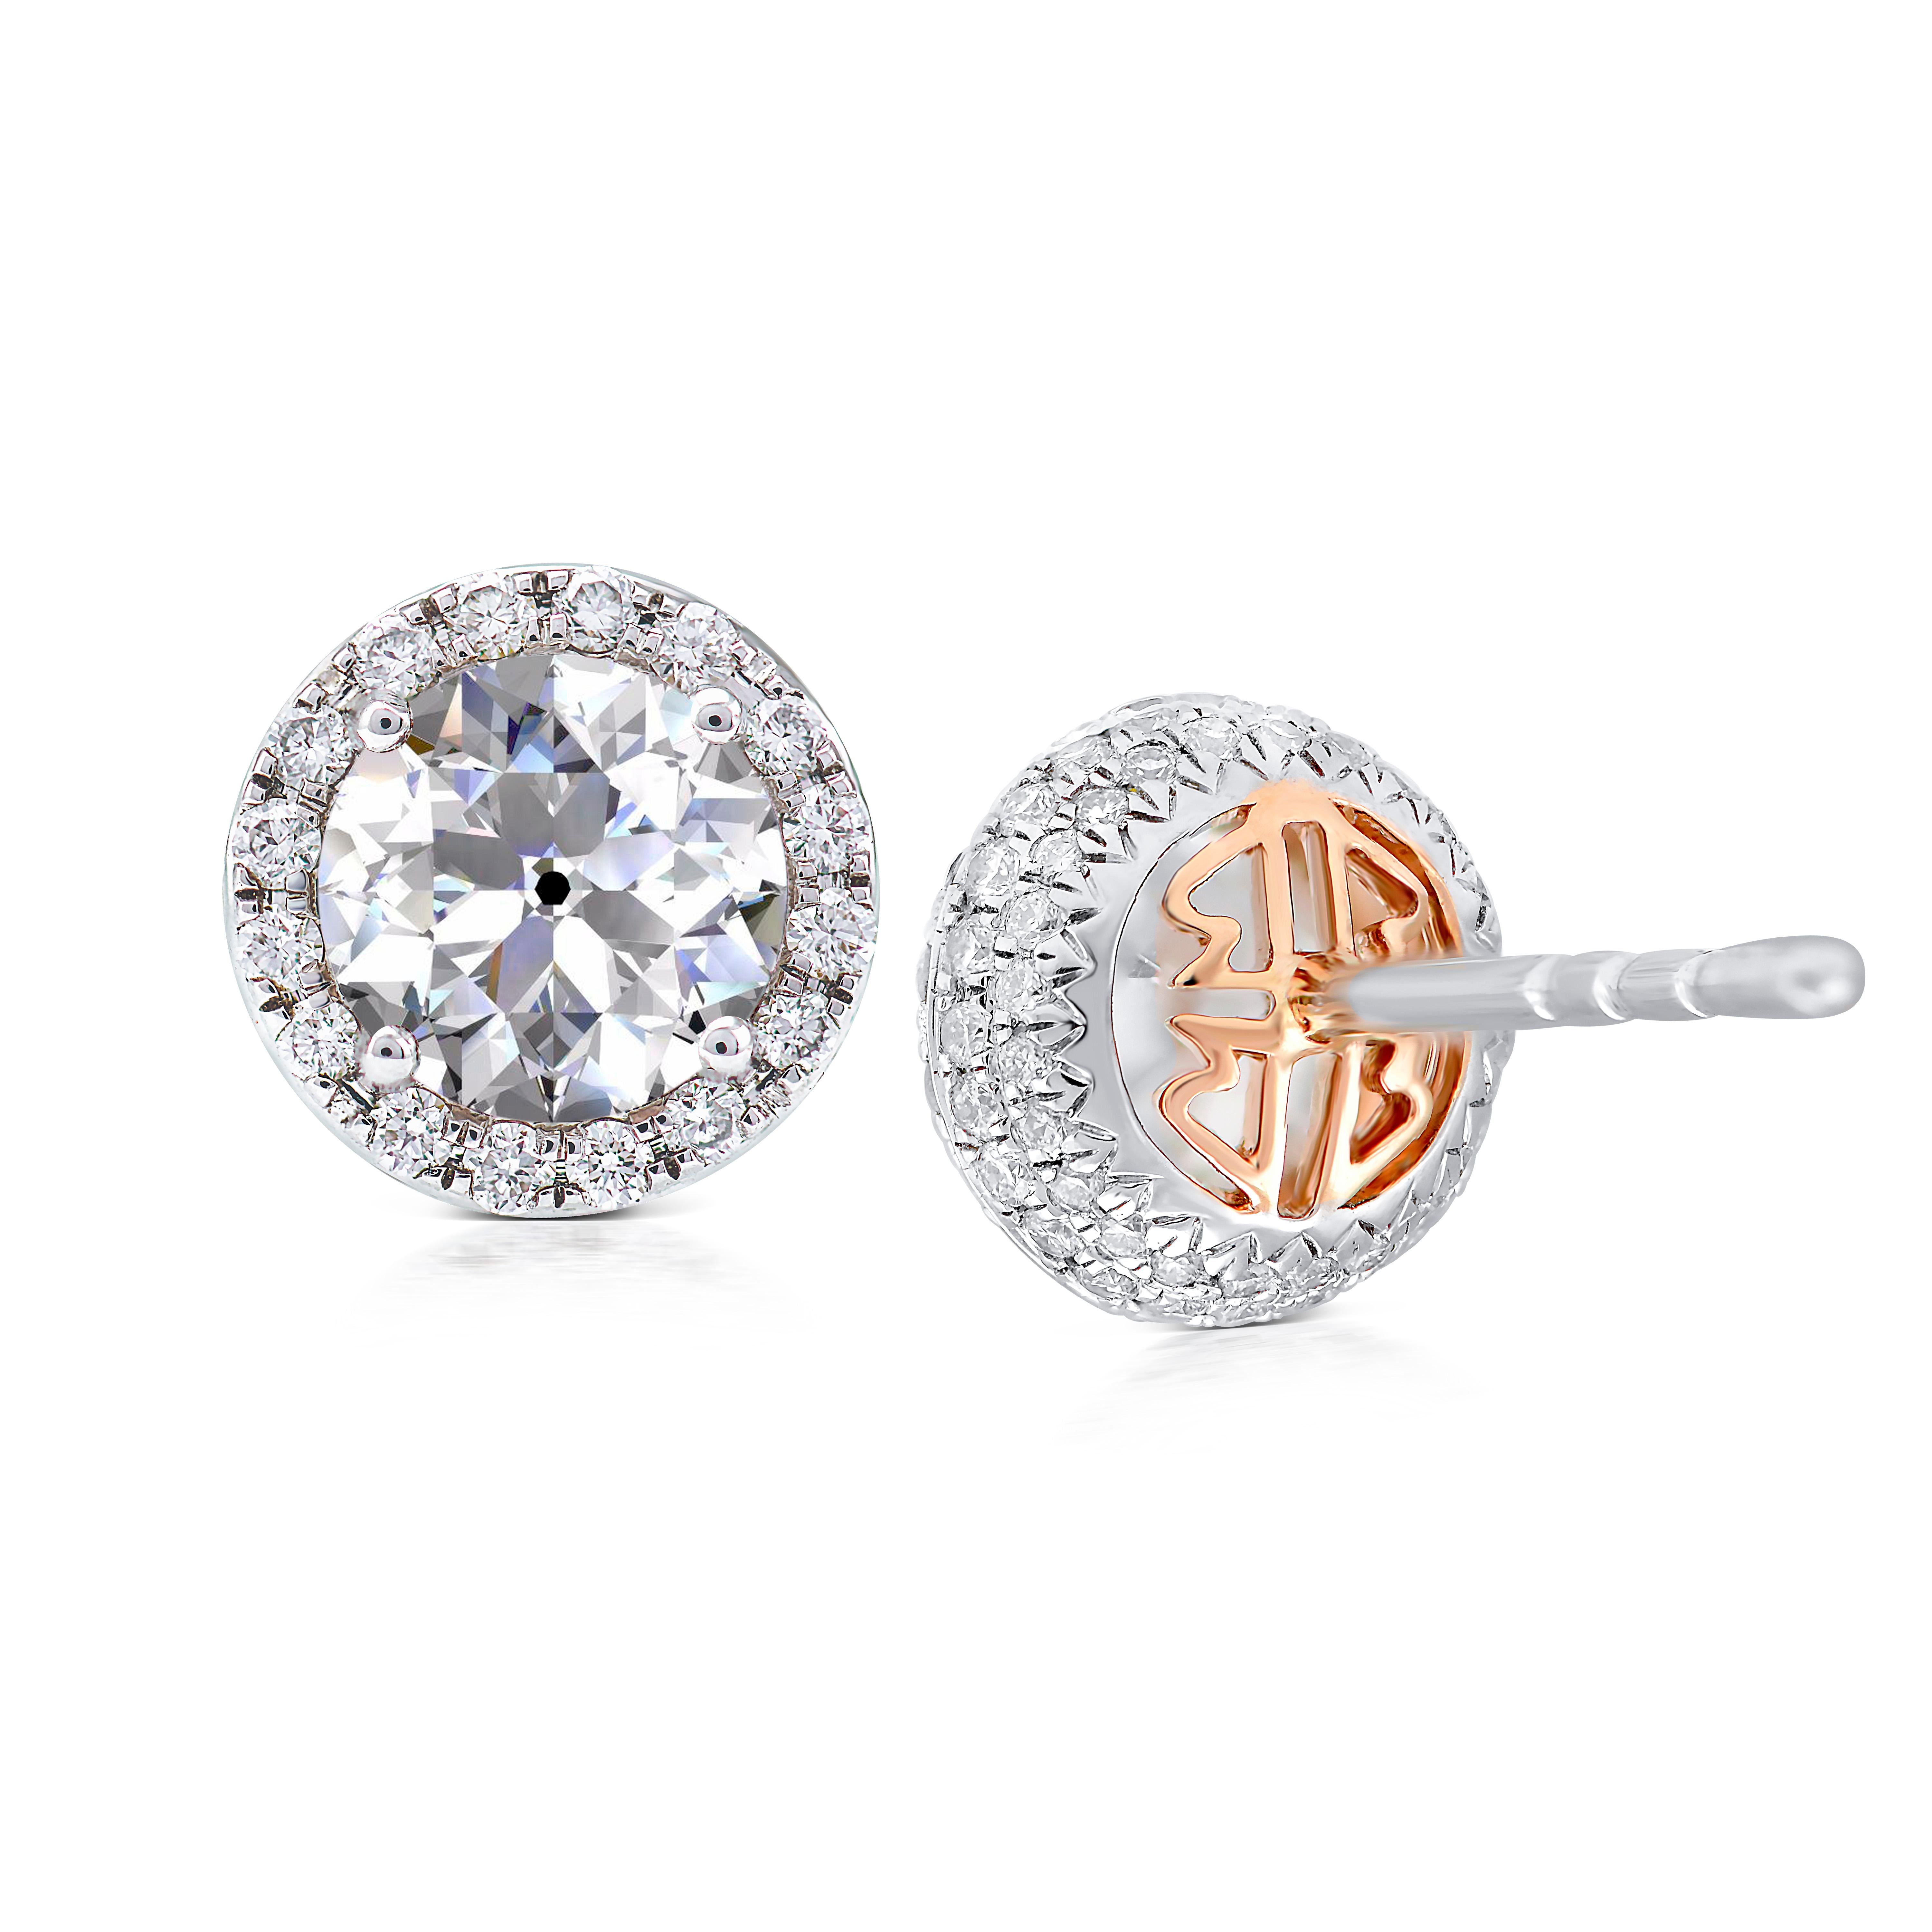 18k Gold 1.38 ct Old Mine Cut Diamond Halo Earrings Studs Contemporary Settings In New Condition For Sale In London, GB